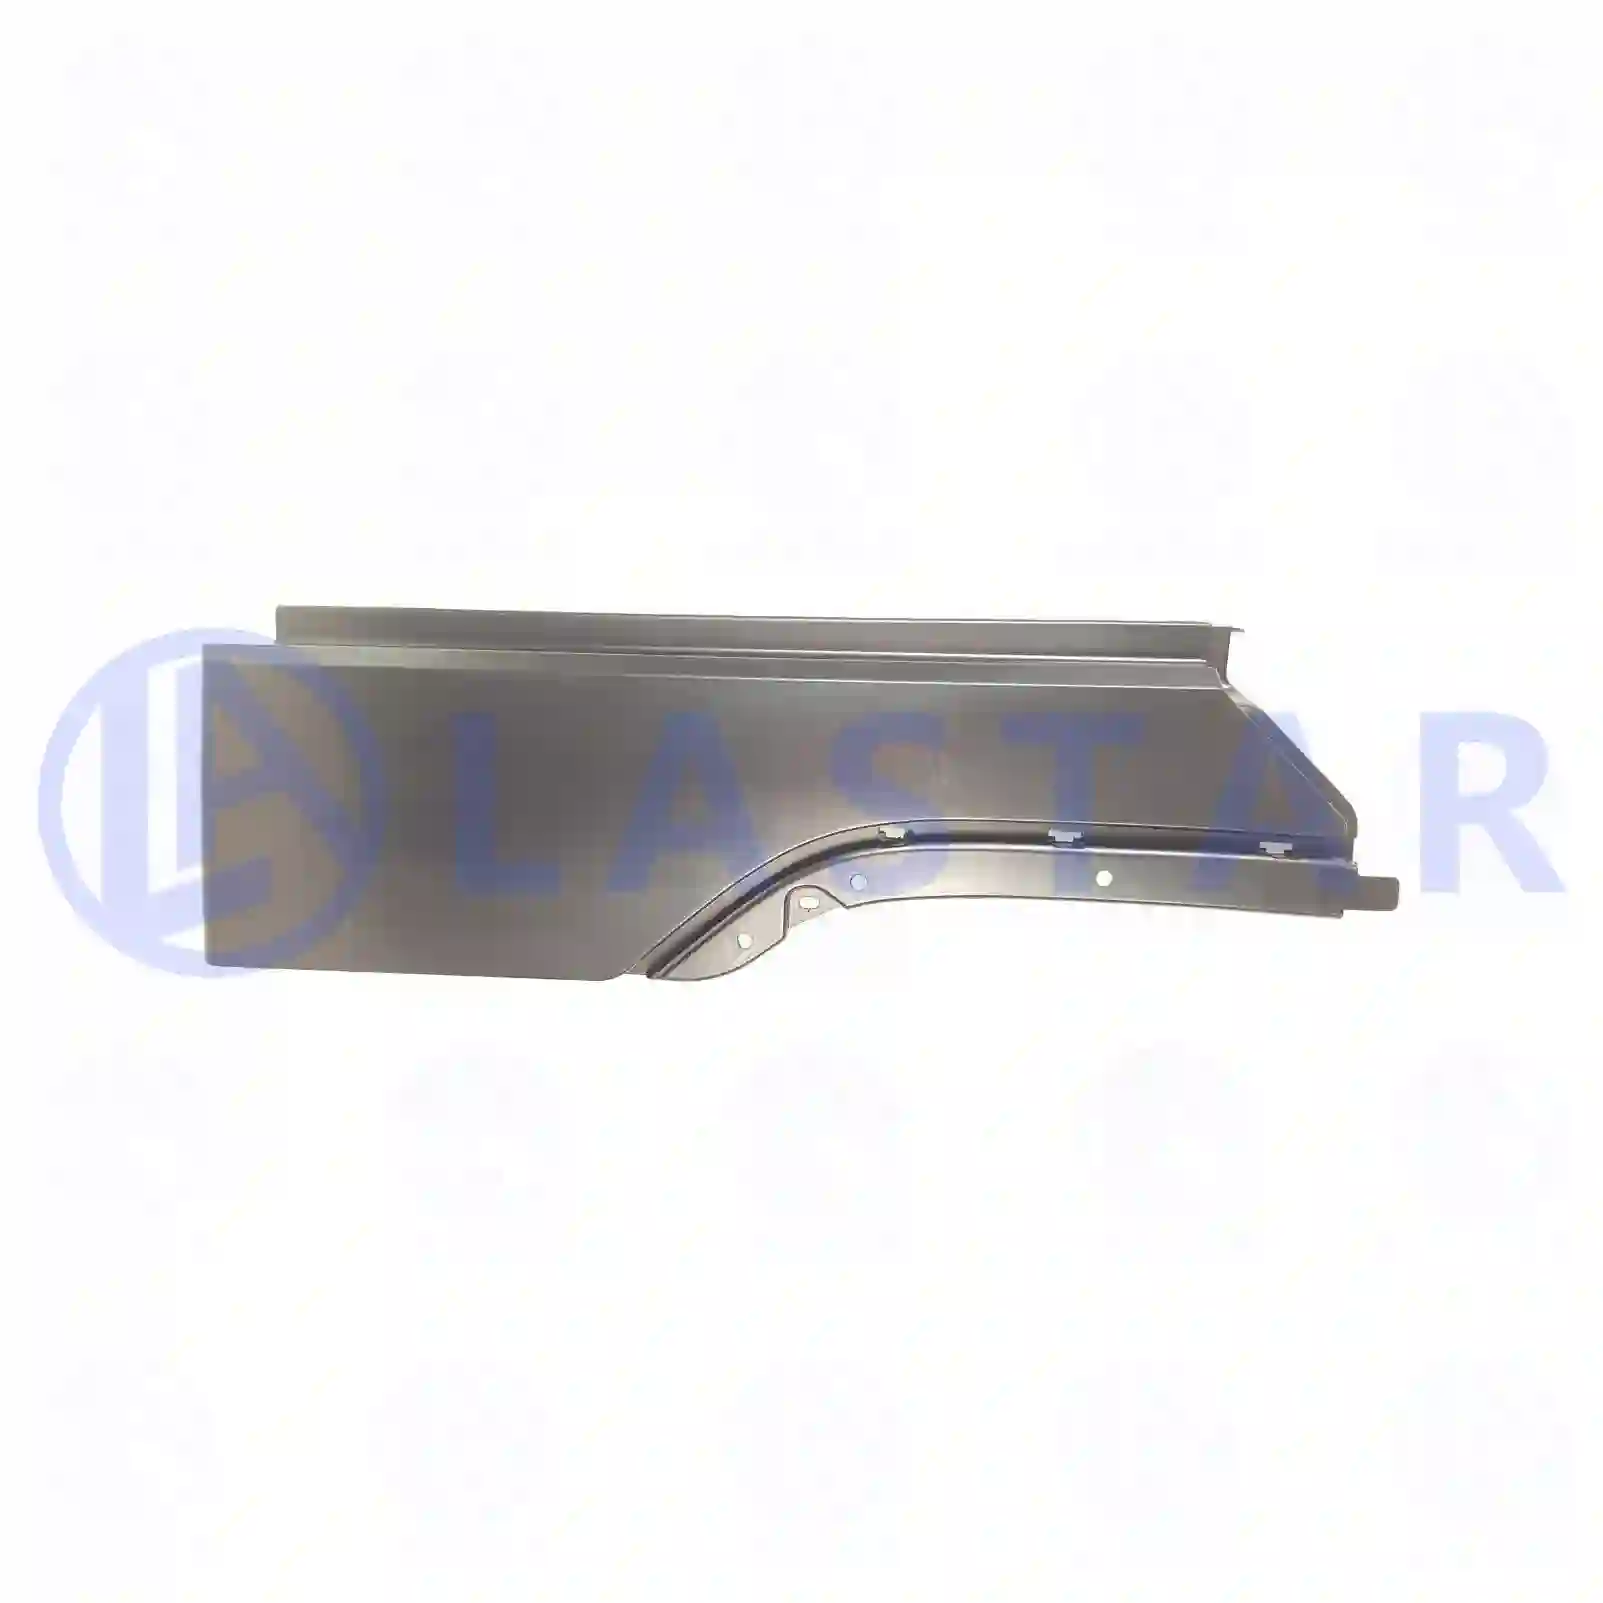 Fender extension, front, right, 77718004, 21302470, 3175930, ZG60759-0008 ||  77718004 Lastar Spare Part | Truck Spare Parts, Auotomotive Spare Parts Fender extension, front, right, 77718004, 21302470, 3175930, ZG60759-0008 ||  77718004 Lastar Spare Part | Truck Spare Parts, Auotomotive Spare Parts